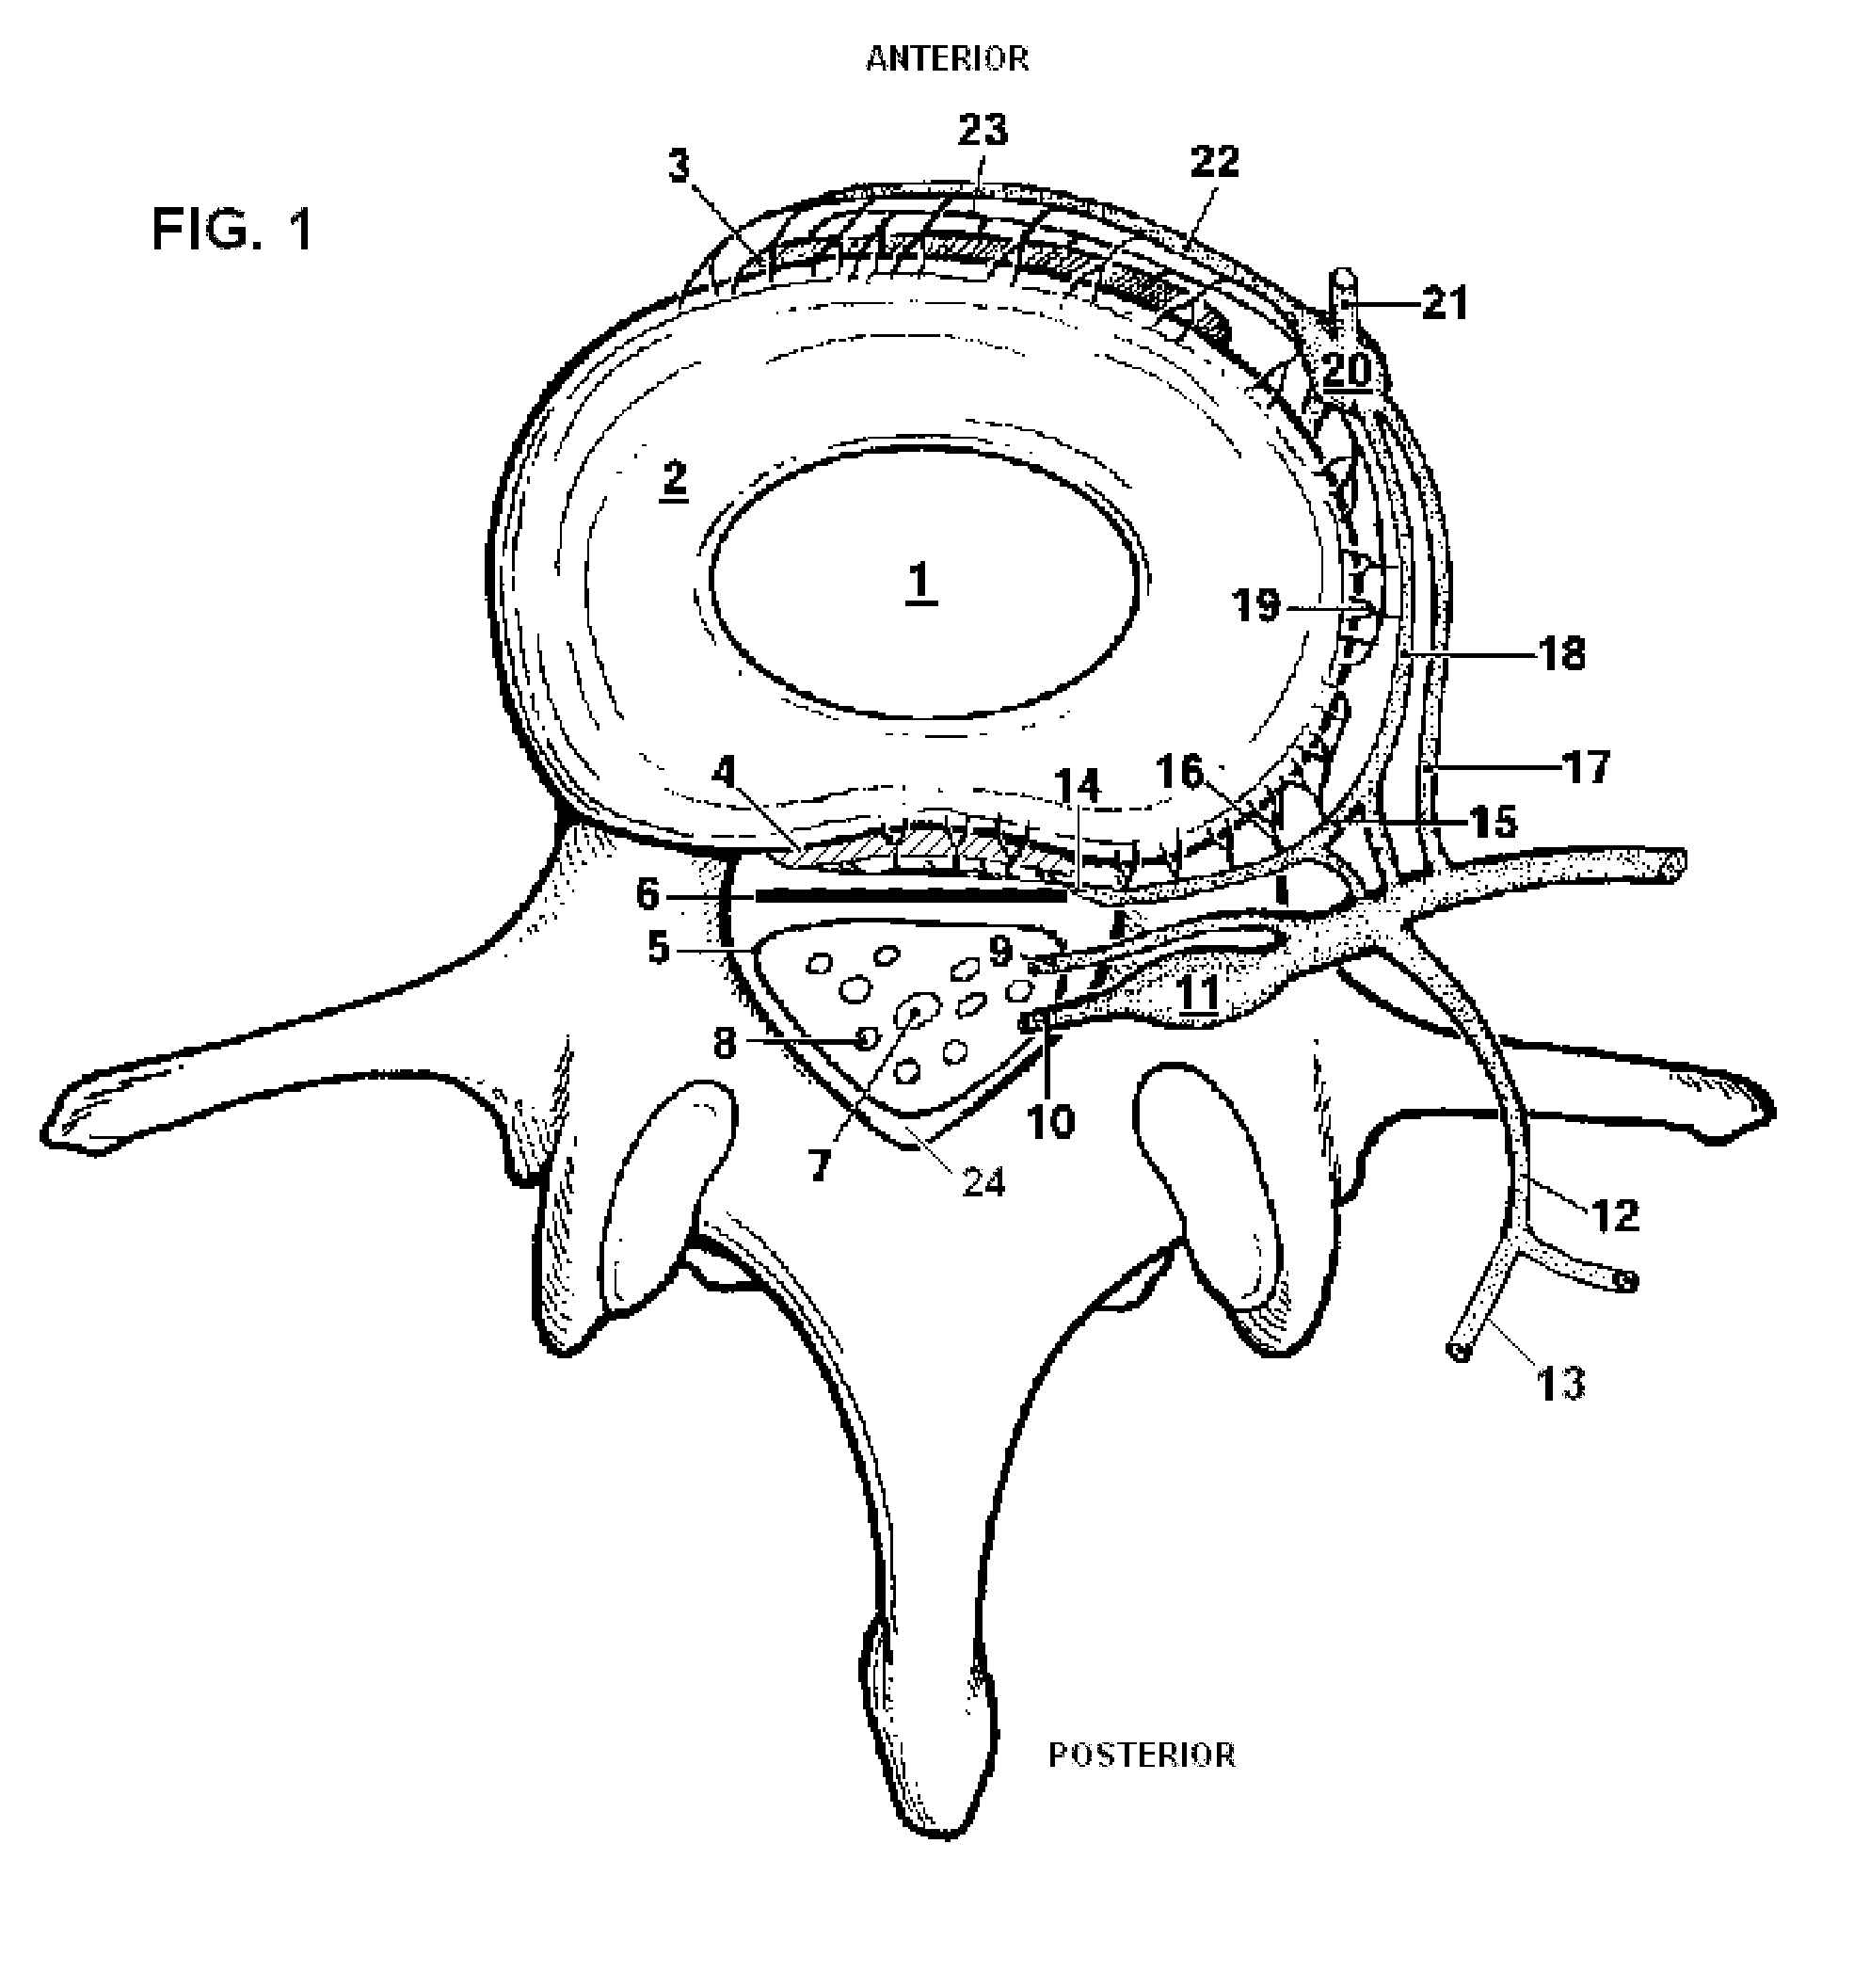 System and method for electrical stimulation of the lumbar vertebral column